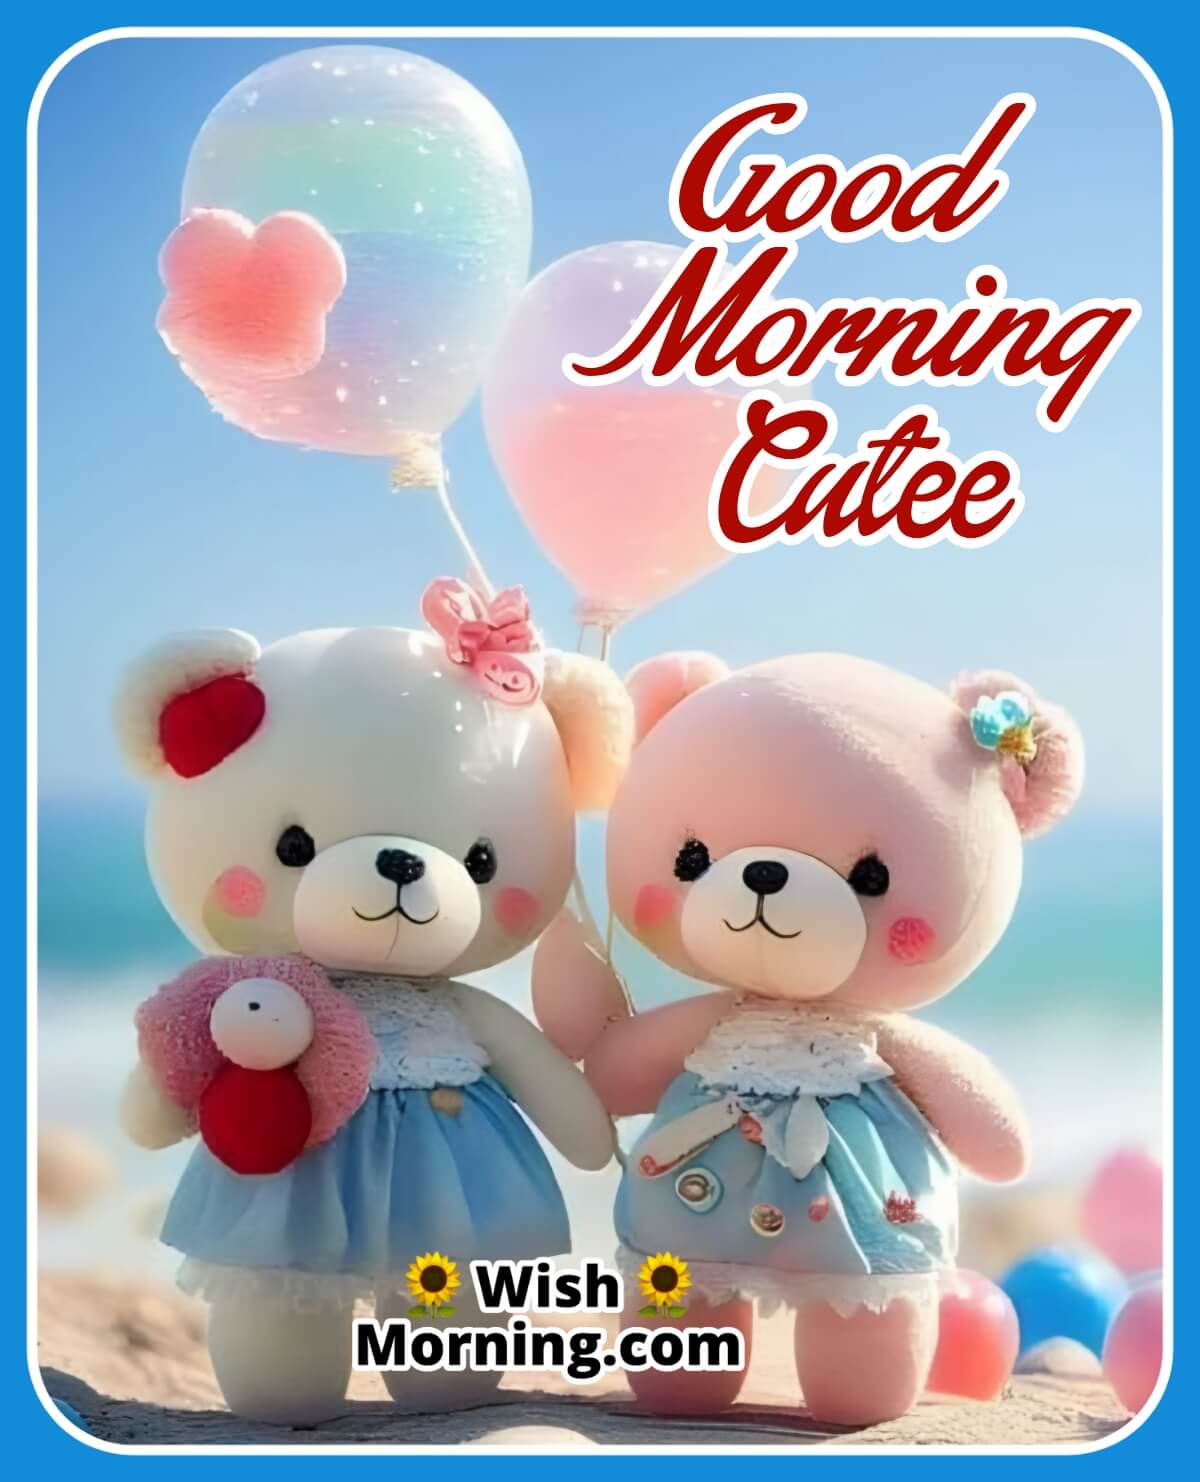 Good Morning Cute Teddy For Her